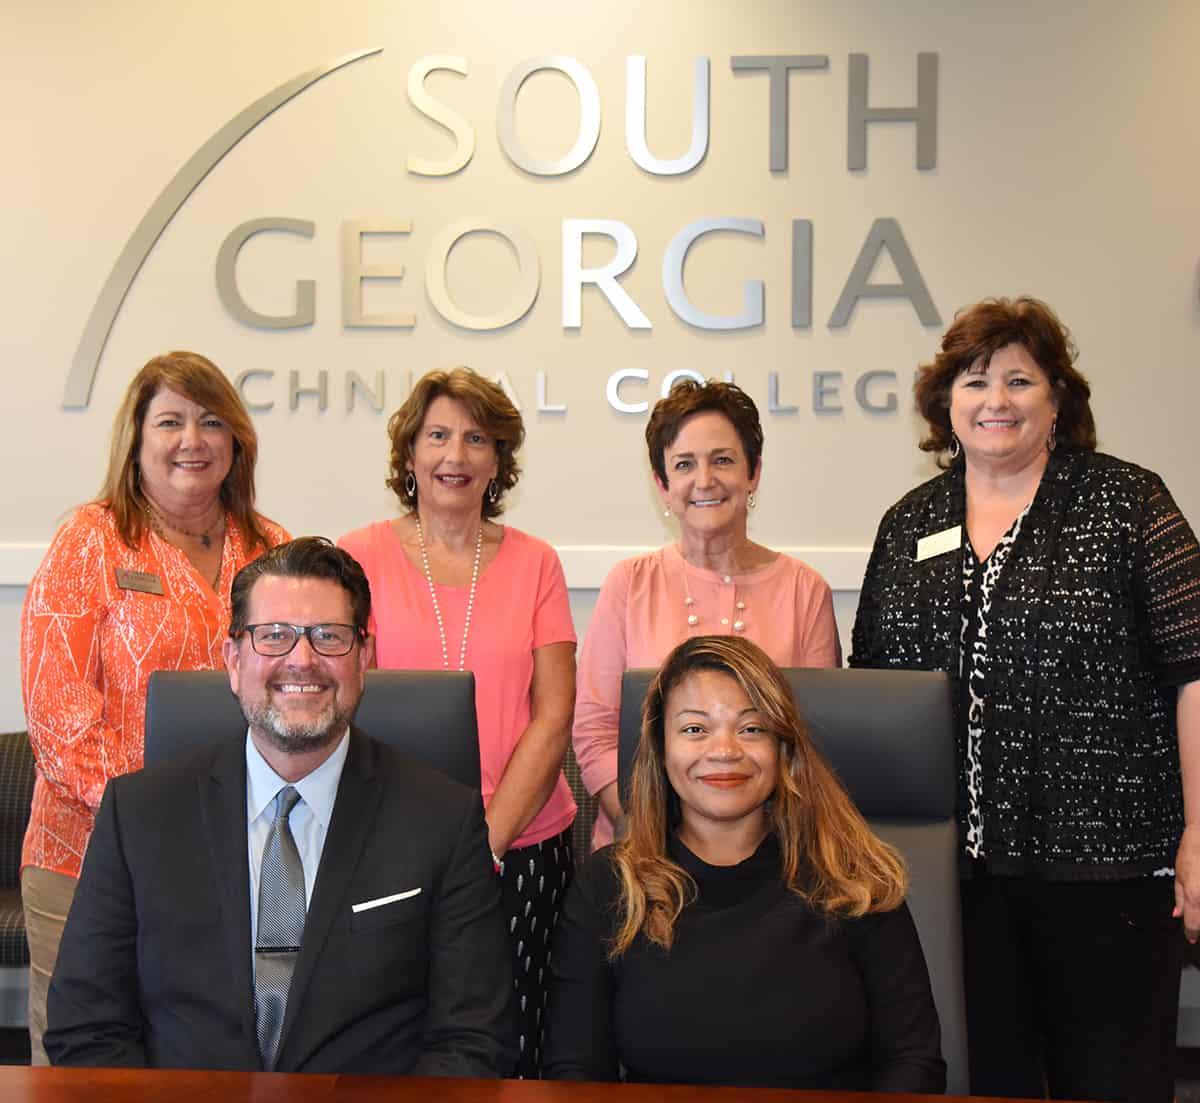 Shown above seated are SGTC President Dr. John Watford and TCSG Assistant Commissioner for Adult Education Dr. Cayanna Good. Shown standing are Vice President of Operations Karen Werling, Adult Education Administrative Assistant Lisa Jordan, Dean of Adult Education at SGTC Lillie Ann Winn and Adult Ed Transition Specialist Tracy Israel.